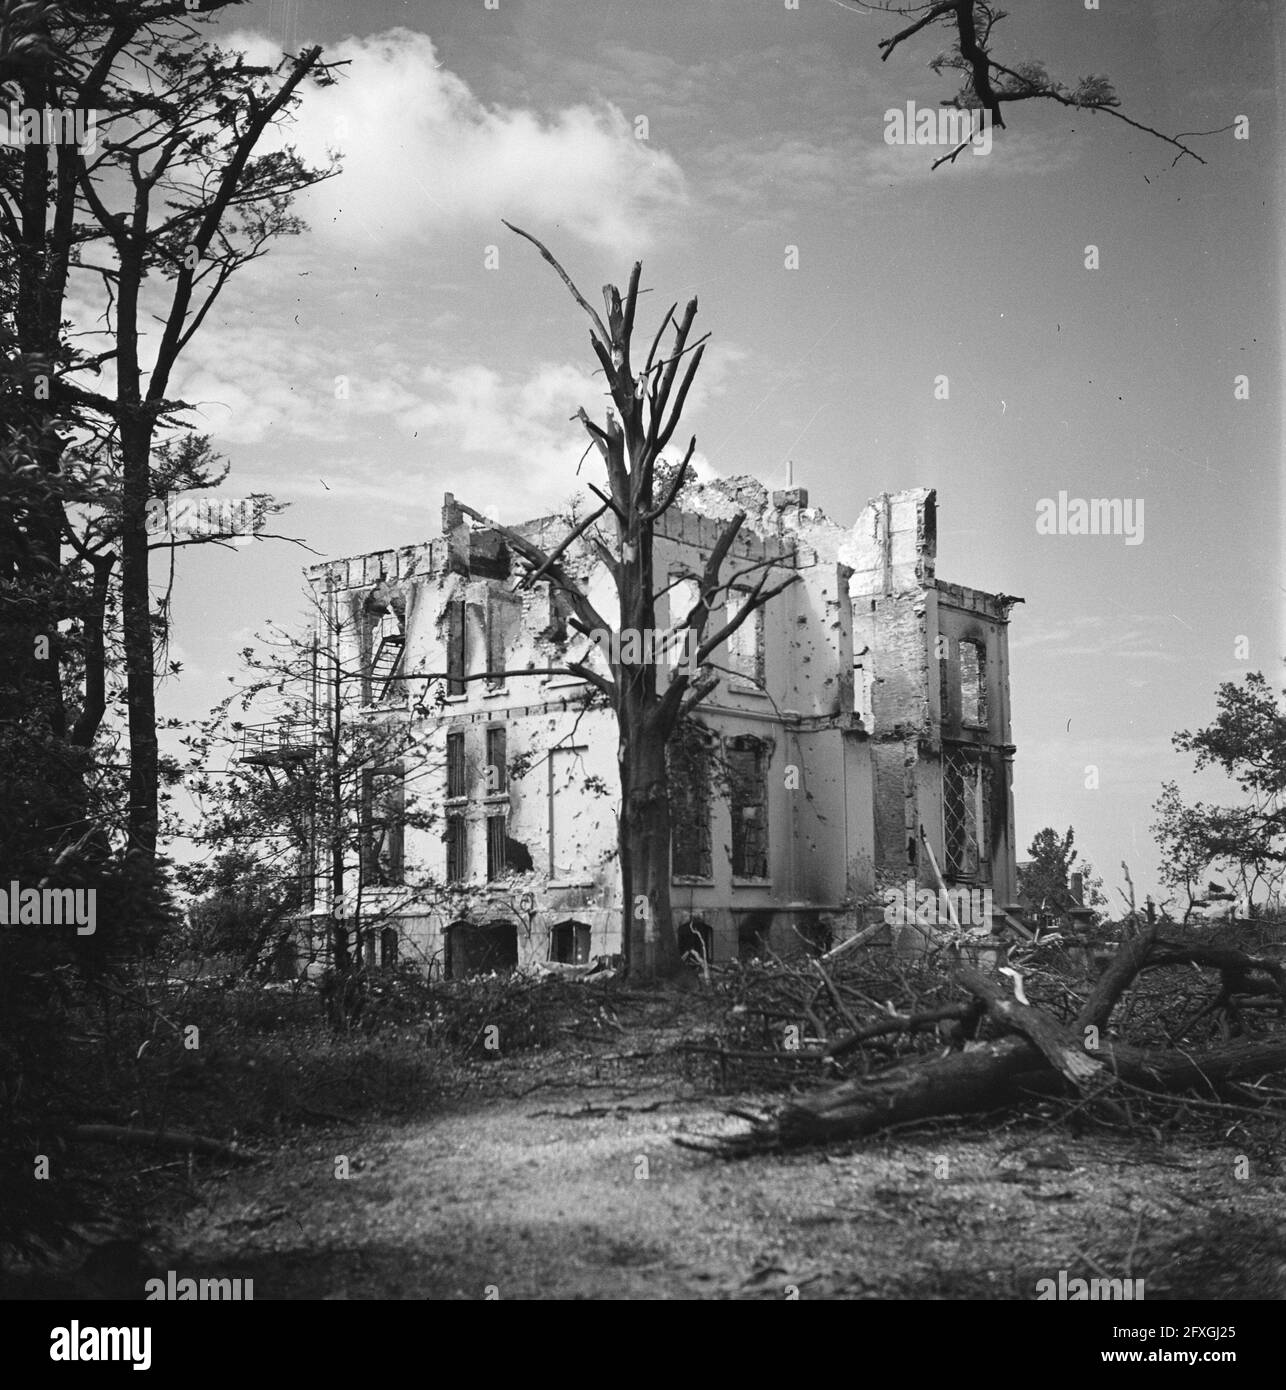 [Destroyed villa], June 1945, buildings, second world war, destruction, The Netherlands, 20th century press agency photo, news to remember, documentary, historic photography 1945-1990, visual stories, human history of the Twentieth Century, capturing moments in time Stock Photo